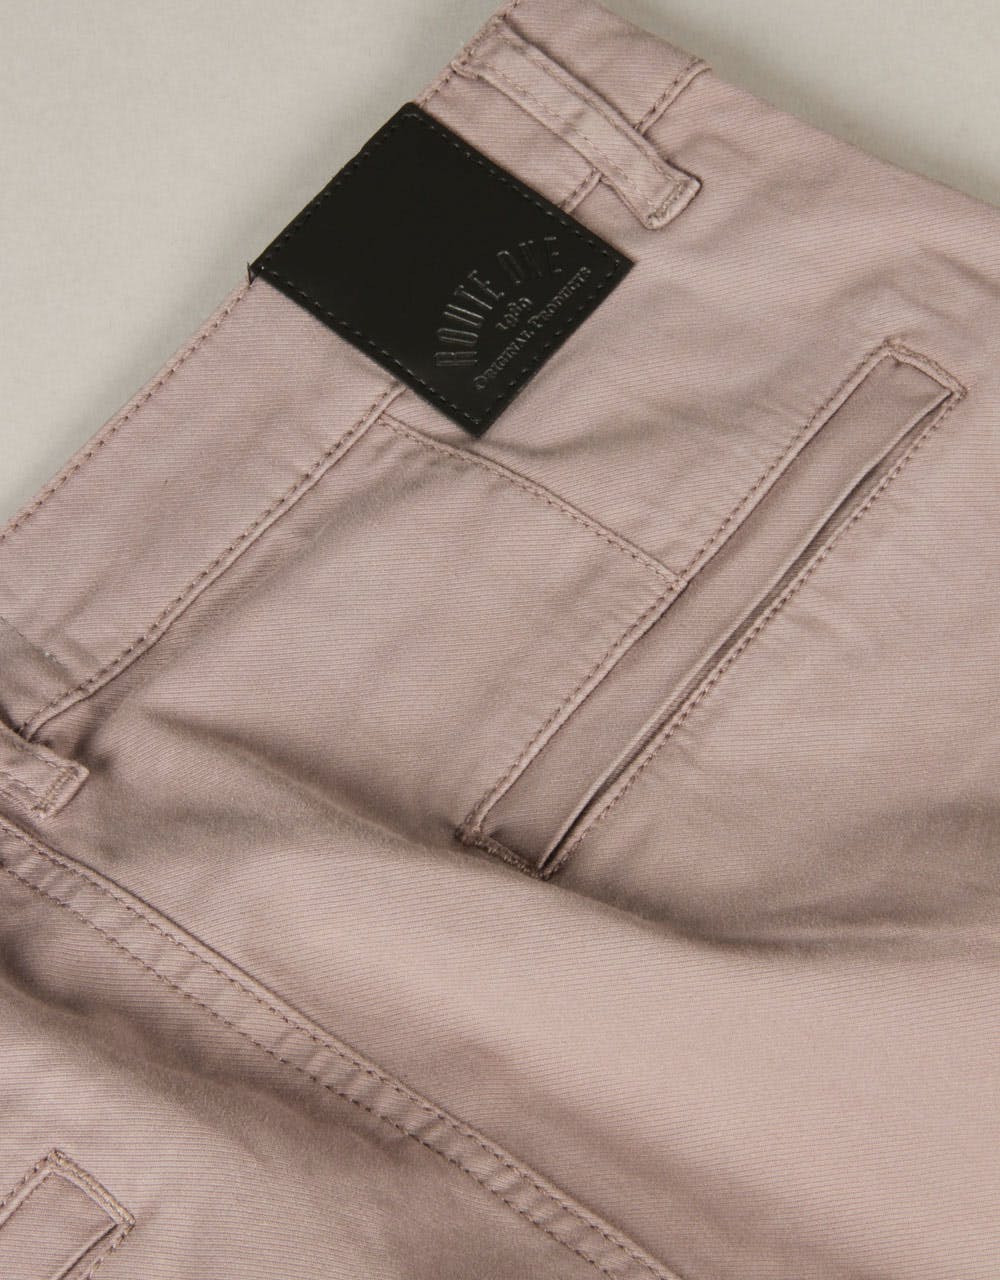 Route One Slim Fit Chinos - Grey